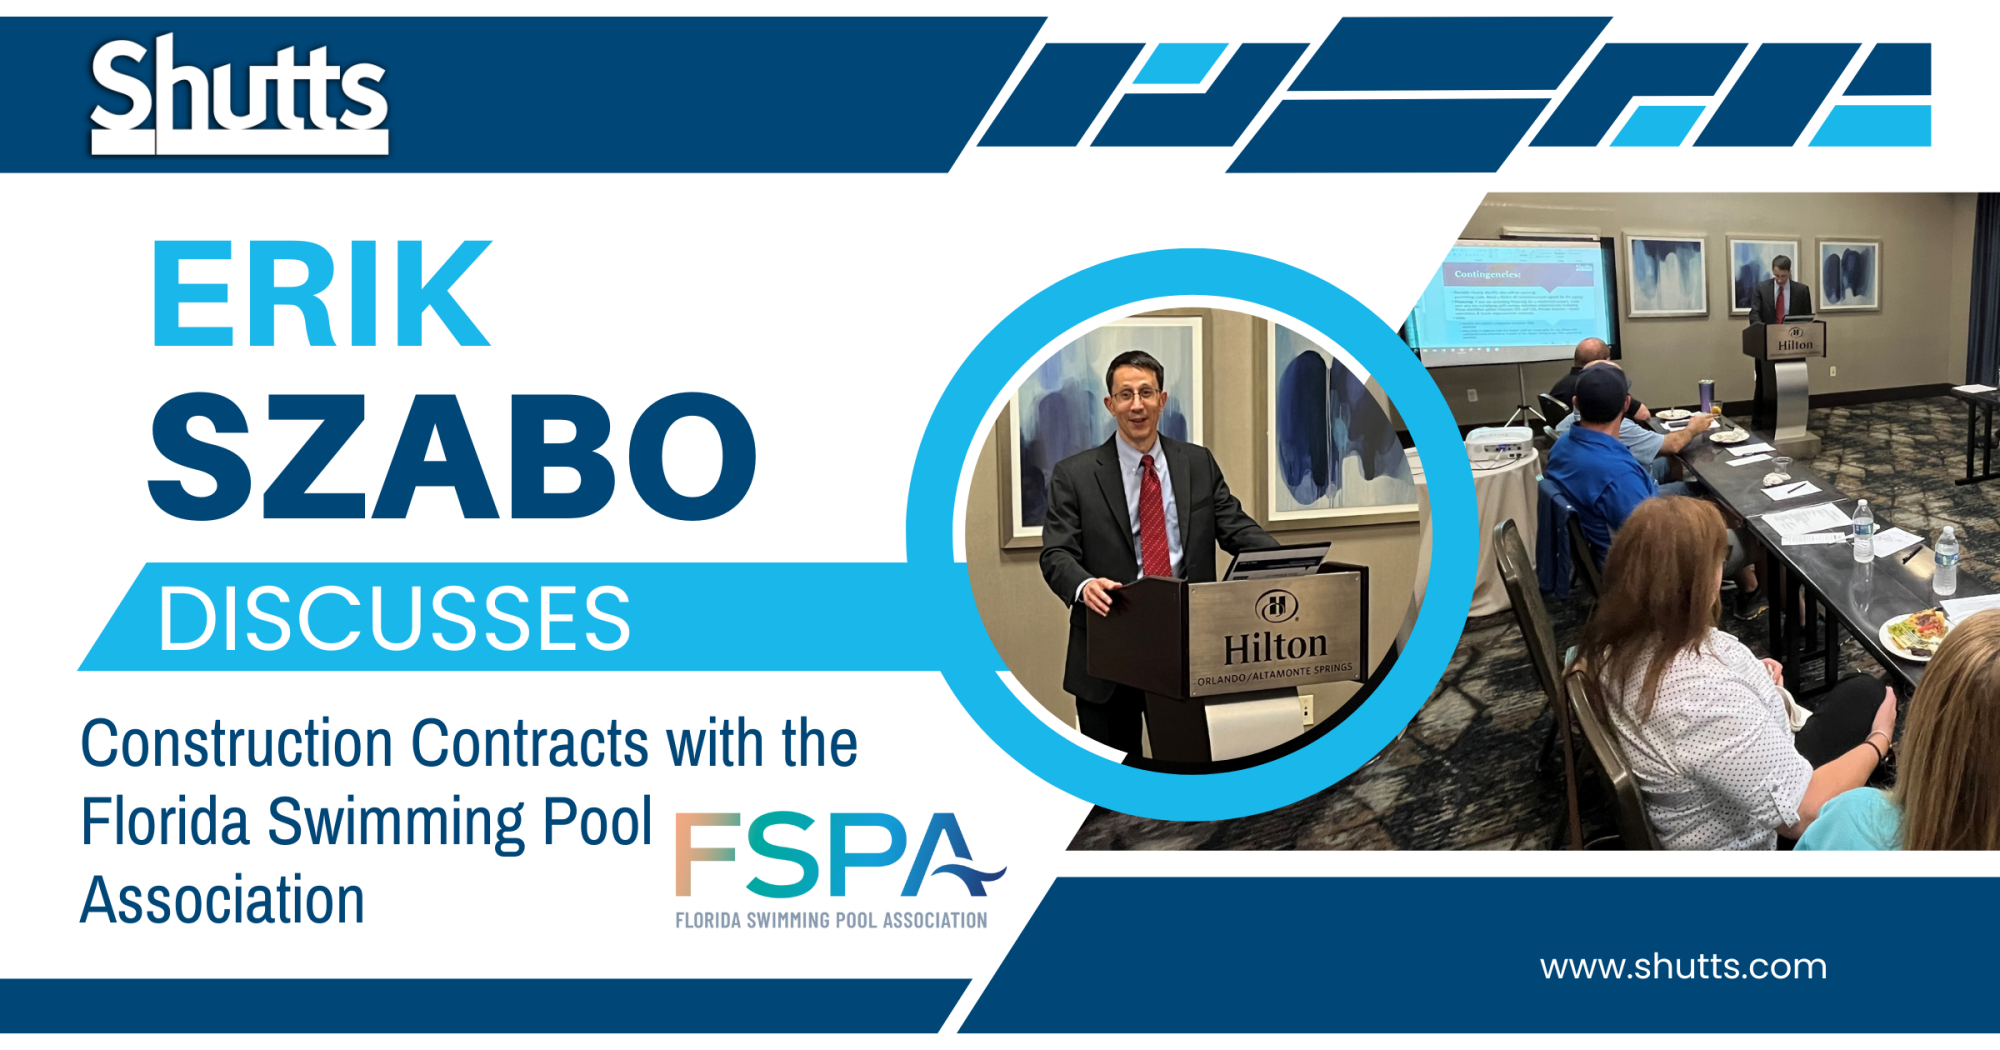 Erik Szabo Discusses Construction Contracts with the Florida Swimming Pool Association